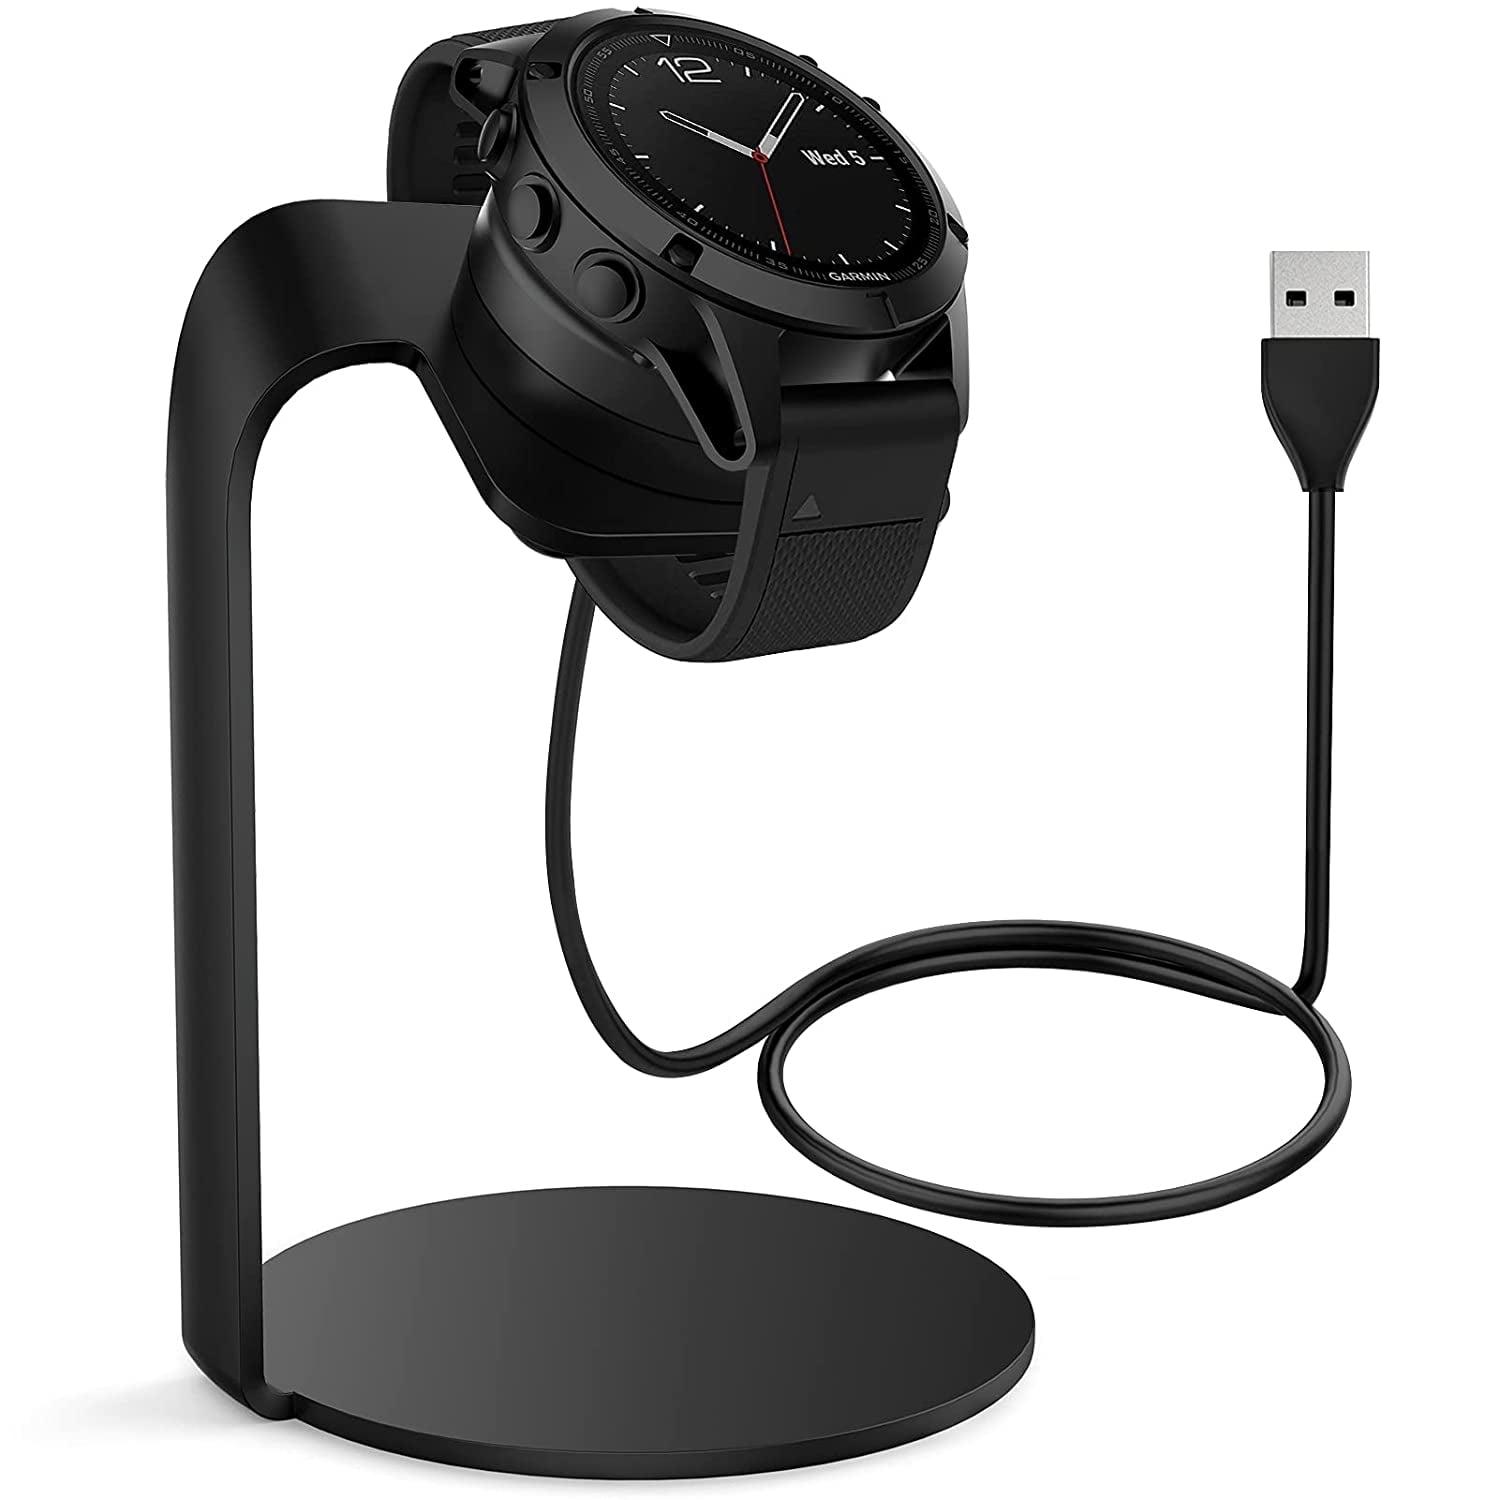 USB Charger Charging Cable Cradle Dock Stand For Garmin Vivoactive Smart  Watch